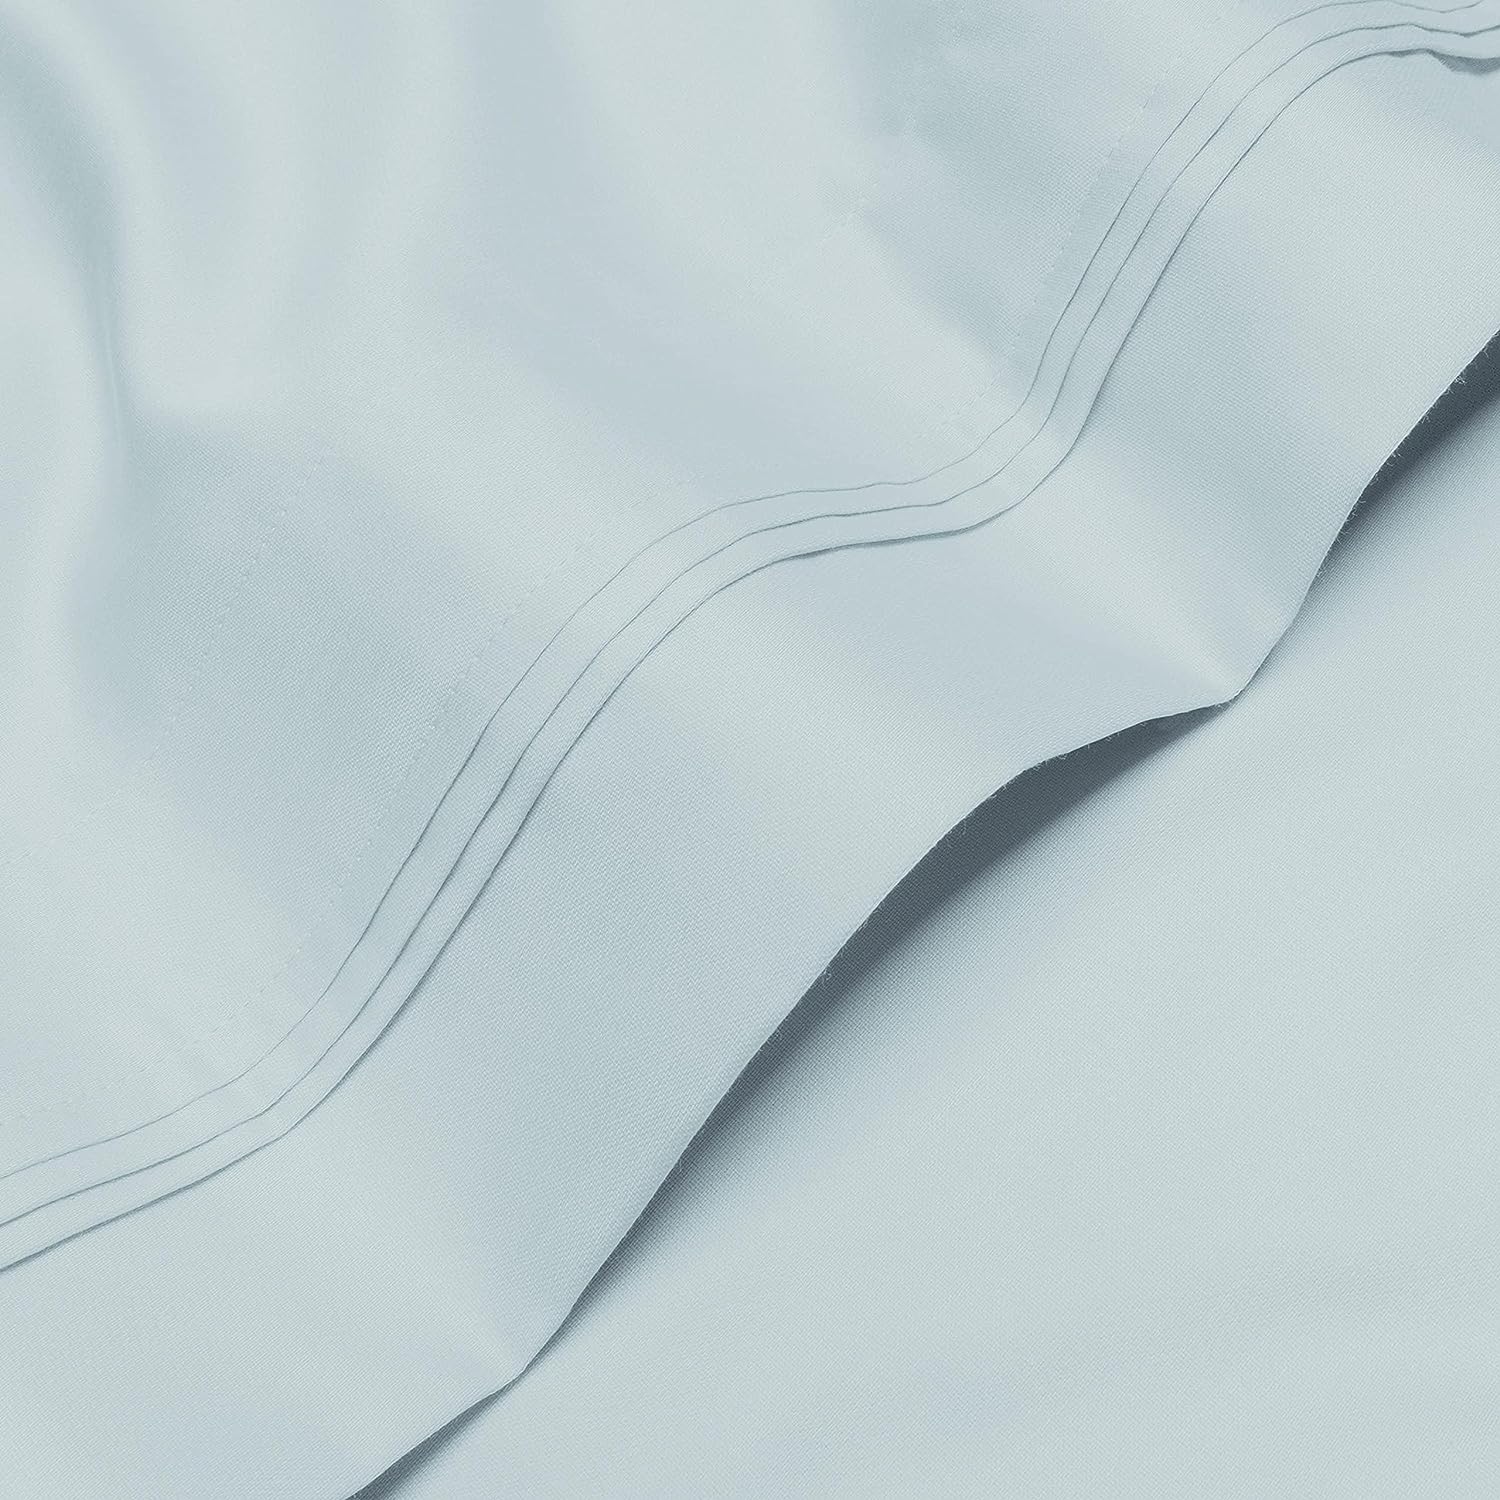 Superior Egyptian Cotton 1000 Thread Count Extra Deep Pocket Solid Sheet Set - Baby Blue